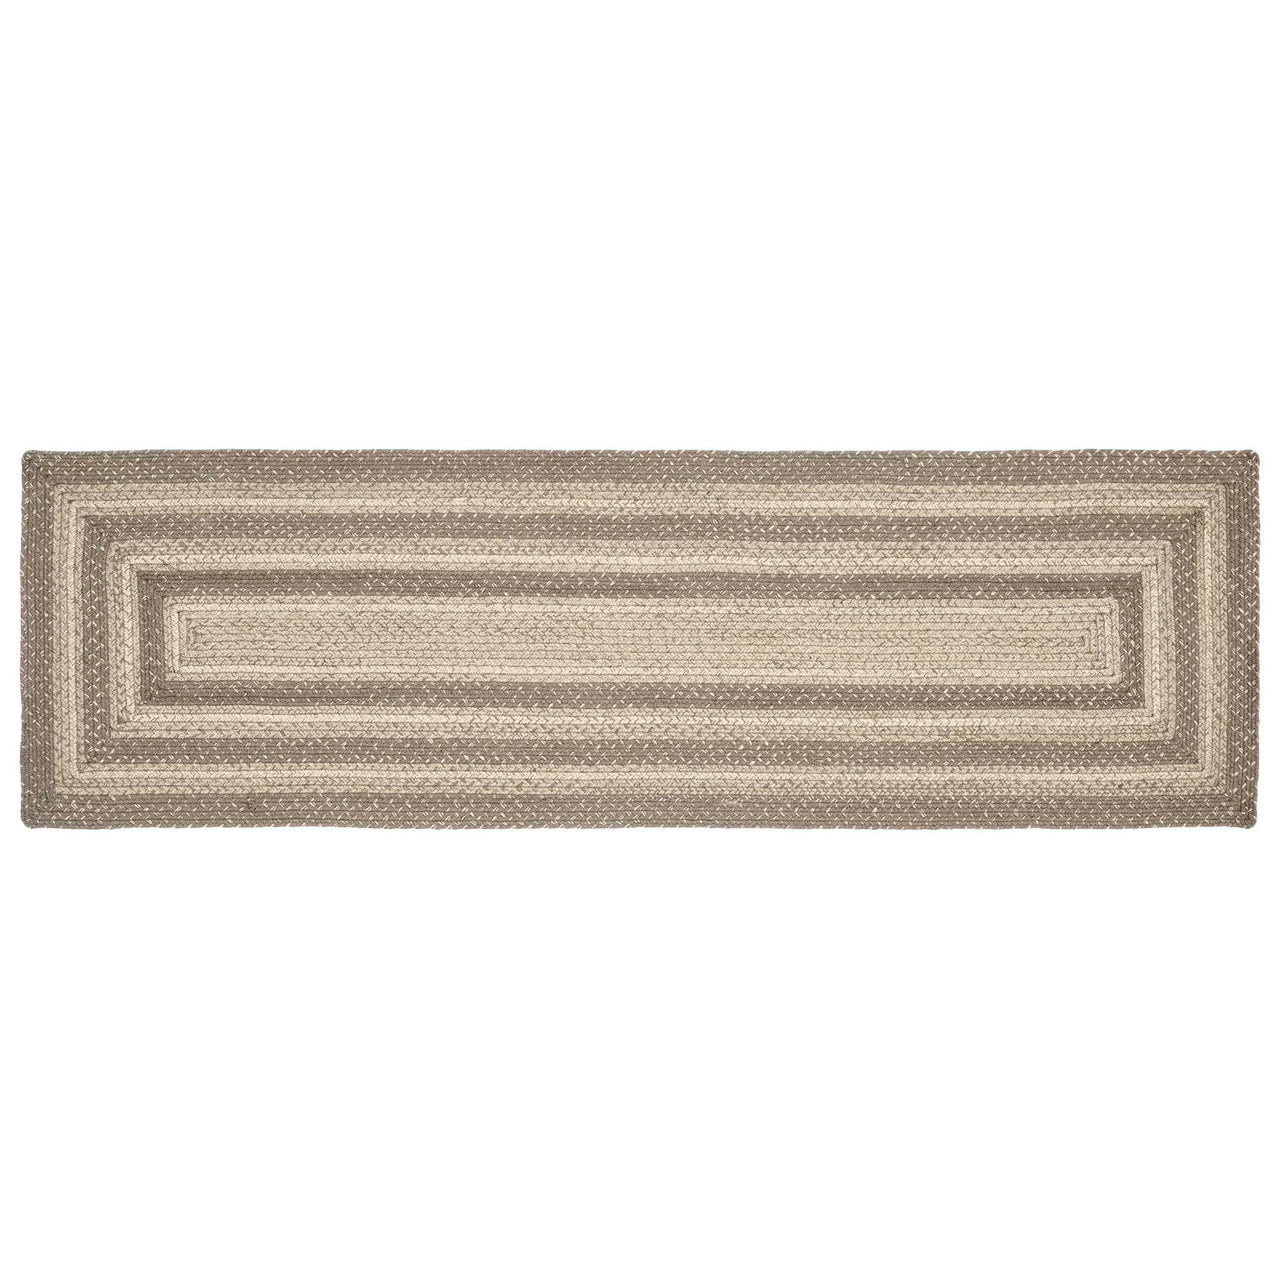 Cobblestone Jute Braided Rug/Runner Rect with Rug Pad 22"x72" VHC Brands